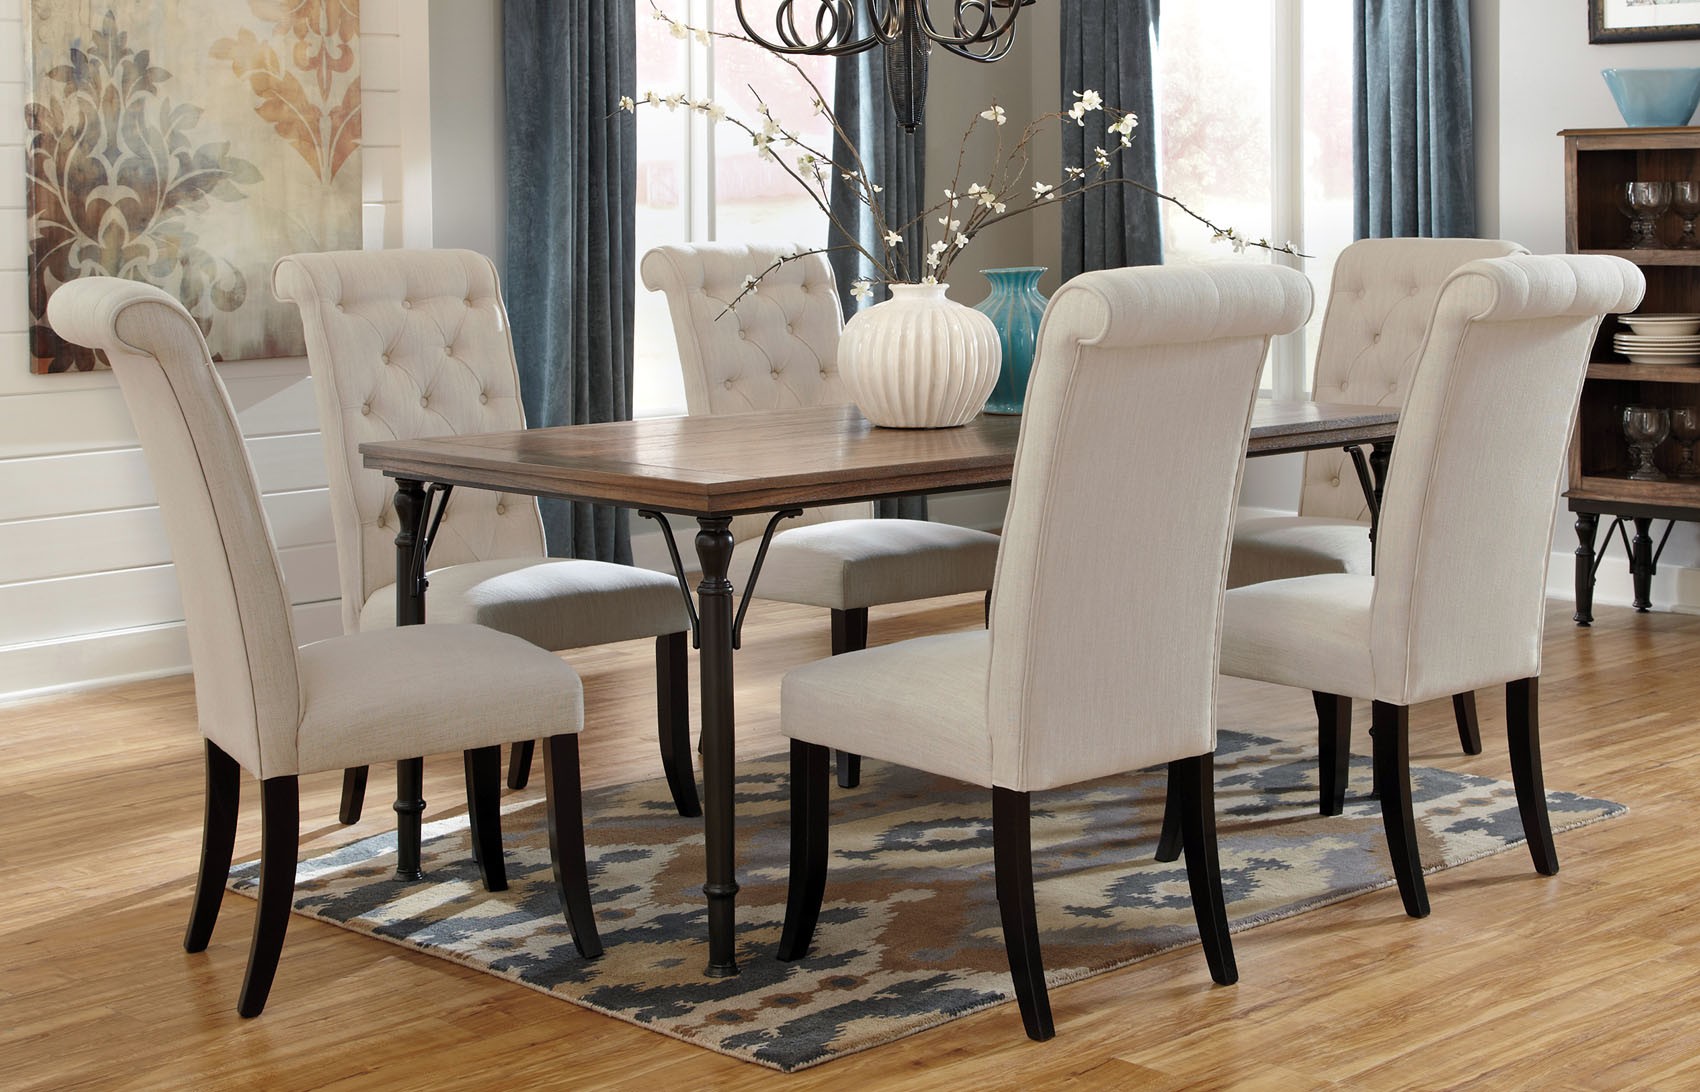 tufted living room chairs